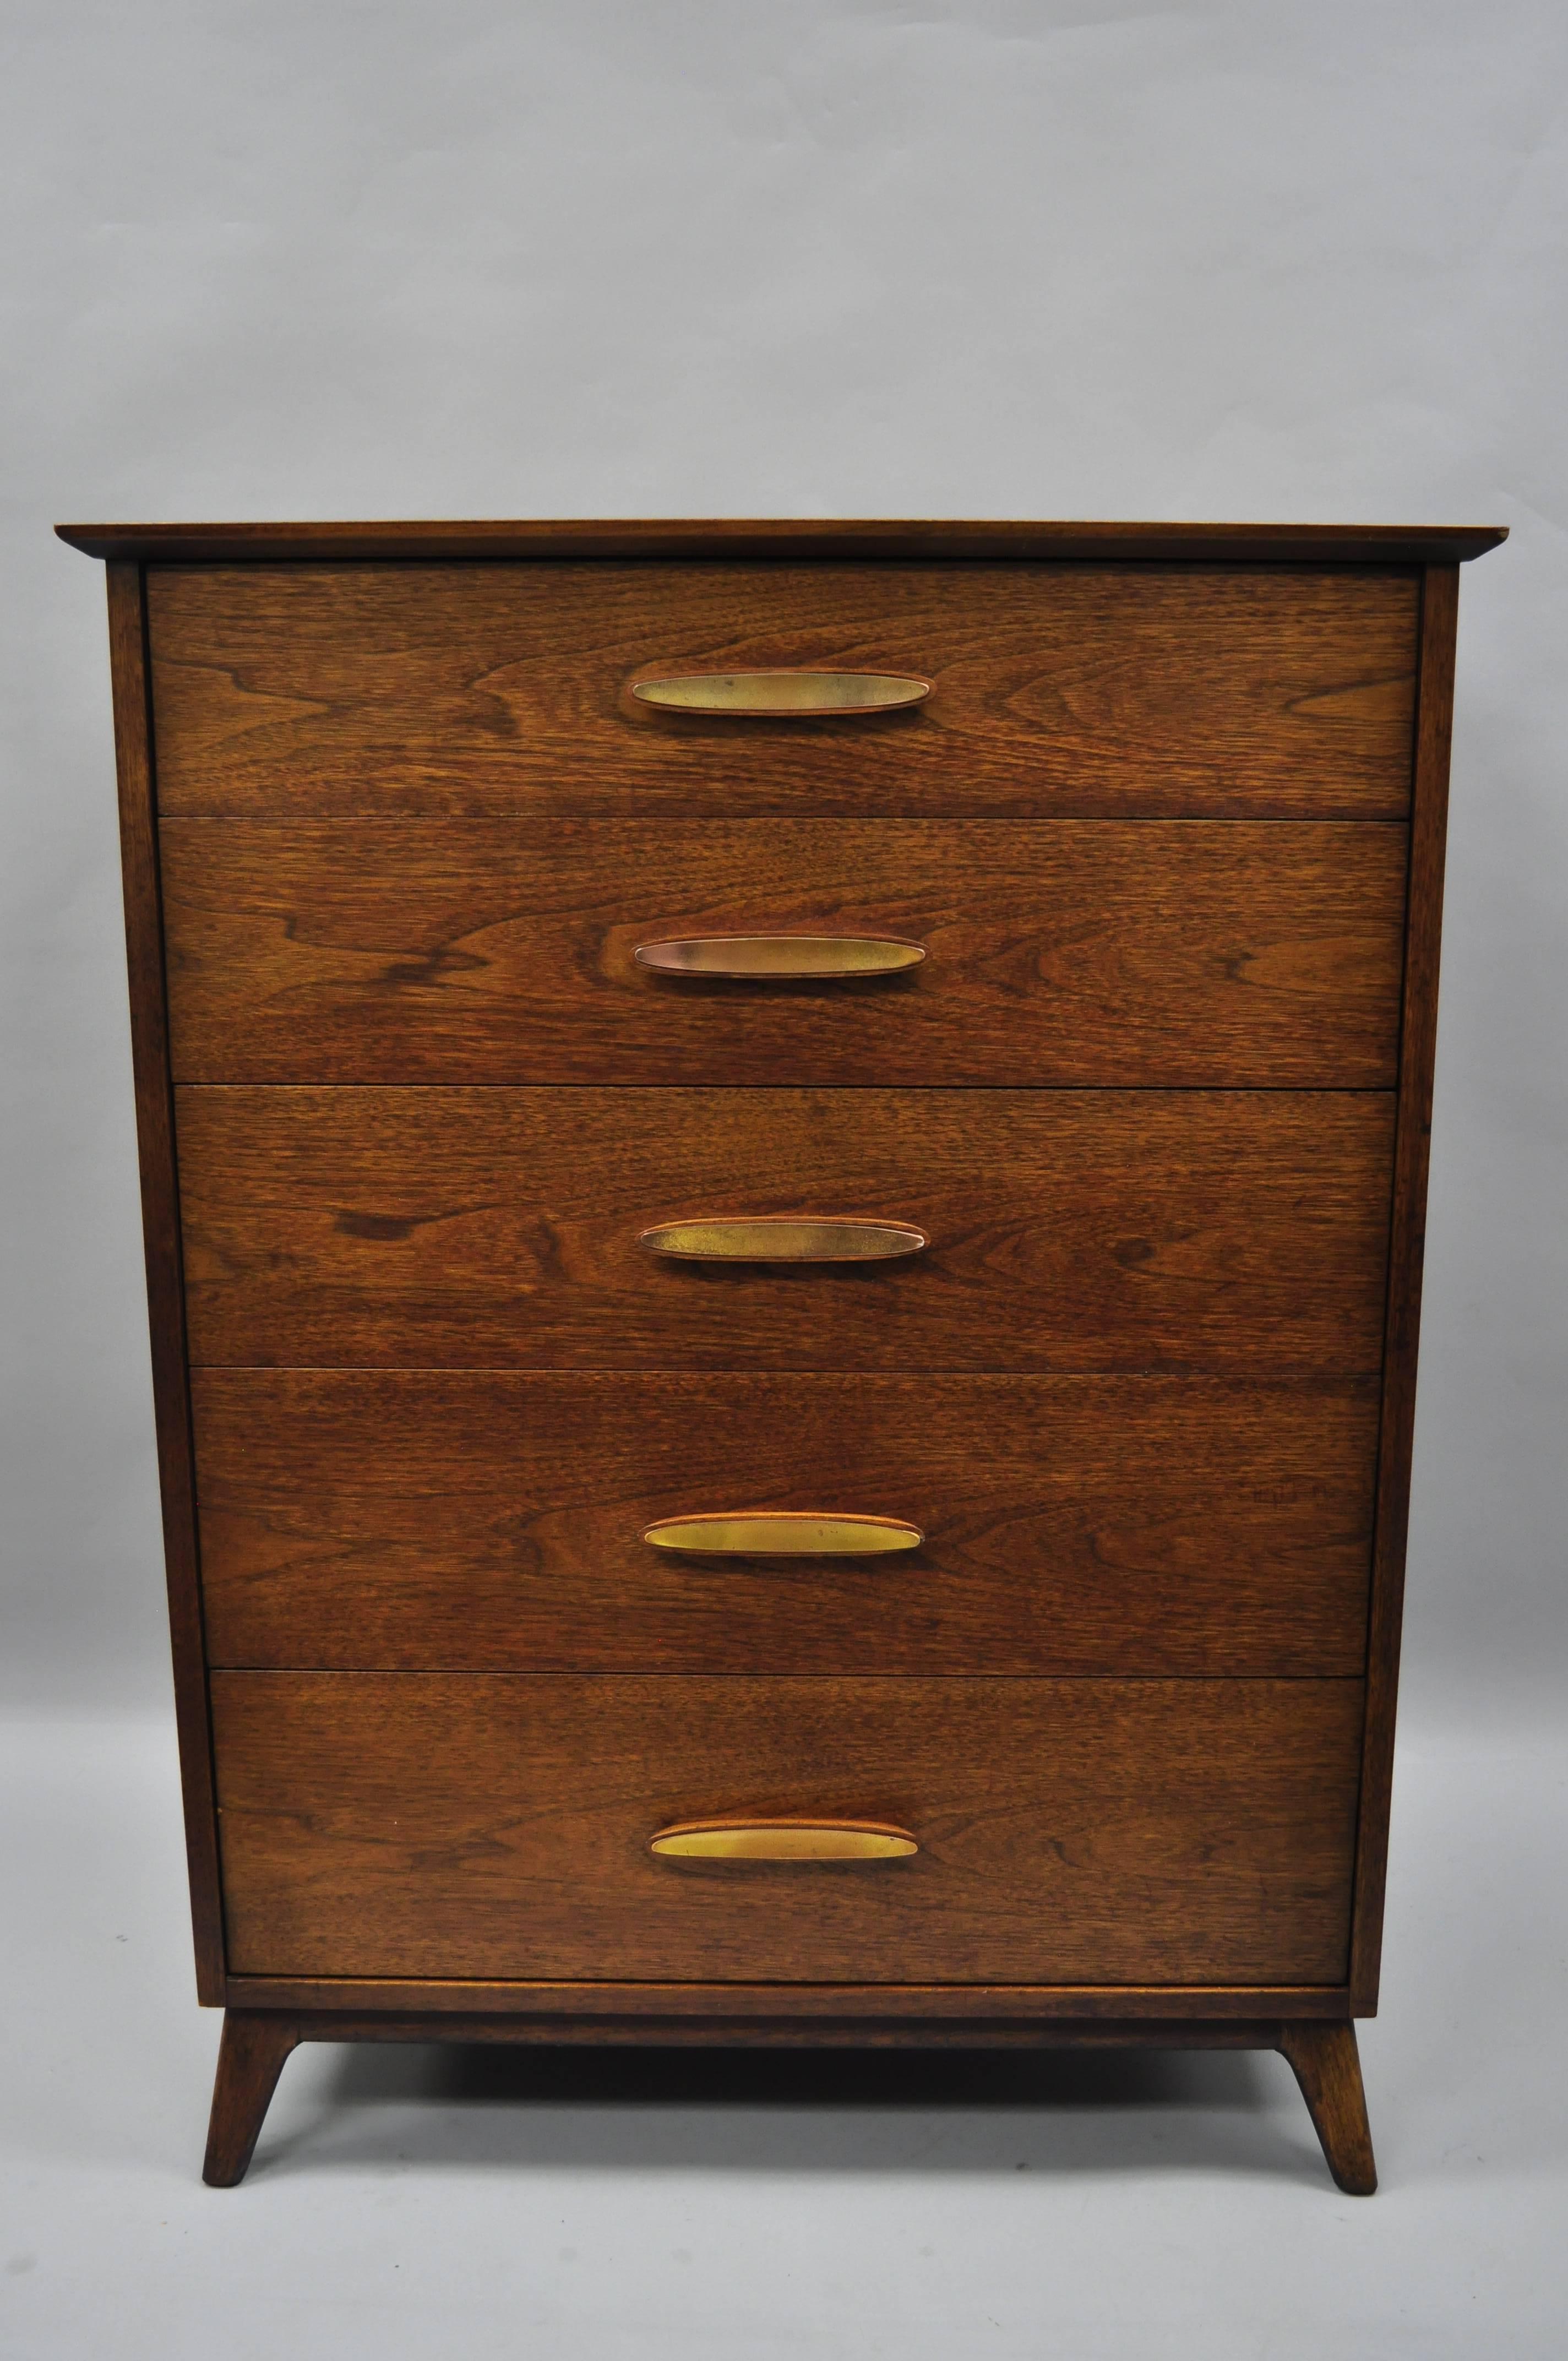 Vintage Heritage Henredon walnut Mid-Century Modern chest of drawers. Item features inlaid wooden top, unique sculpted walnut pulls with burnished brass accents, beautiful wood grain, original Henredon stamp, five dovetailed drawers, circa 1960.